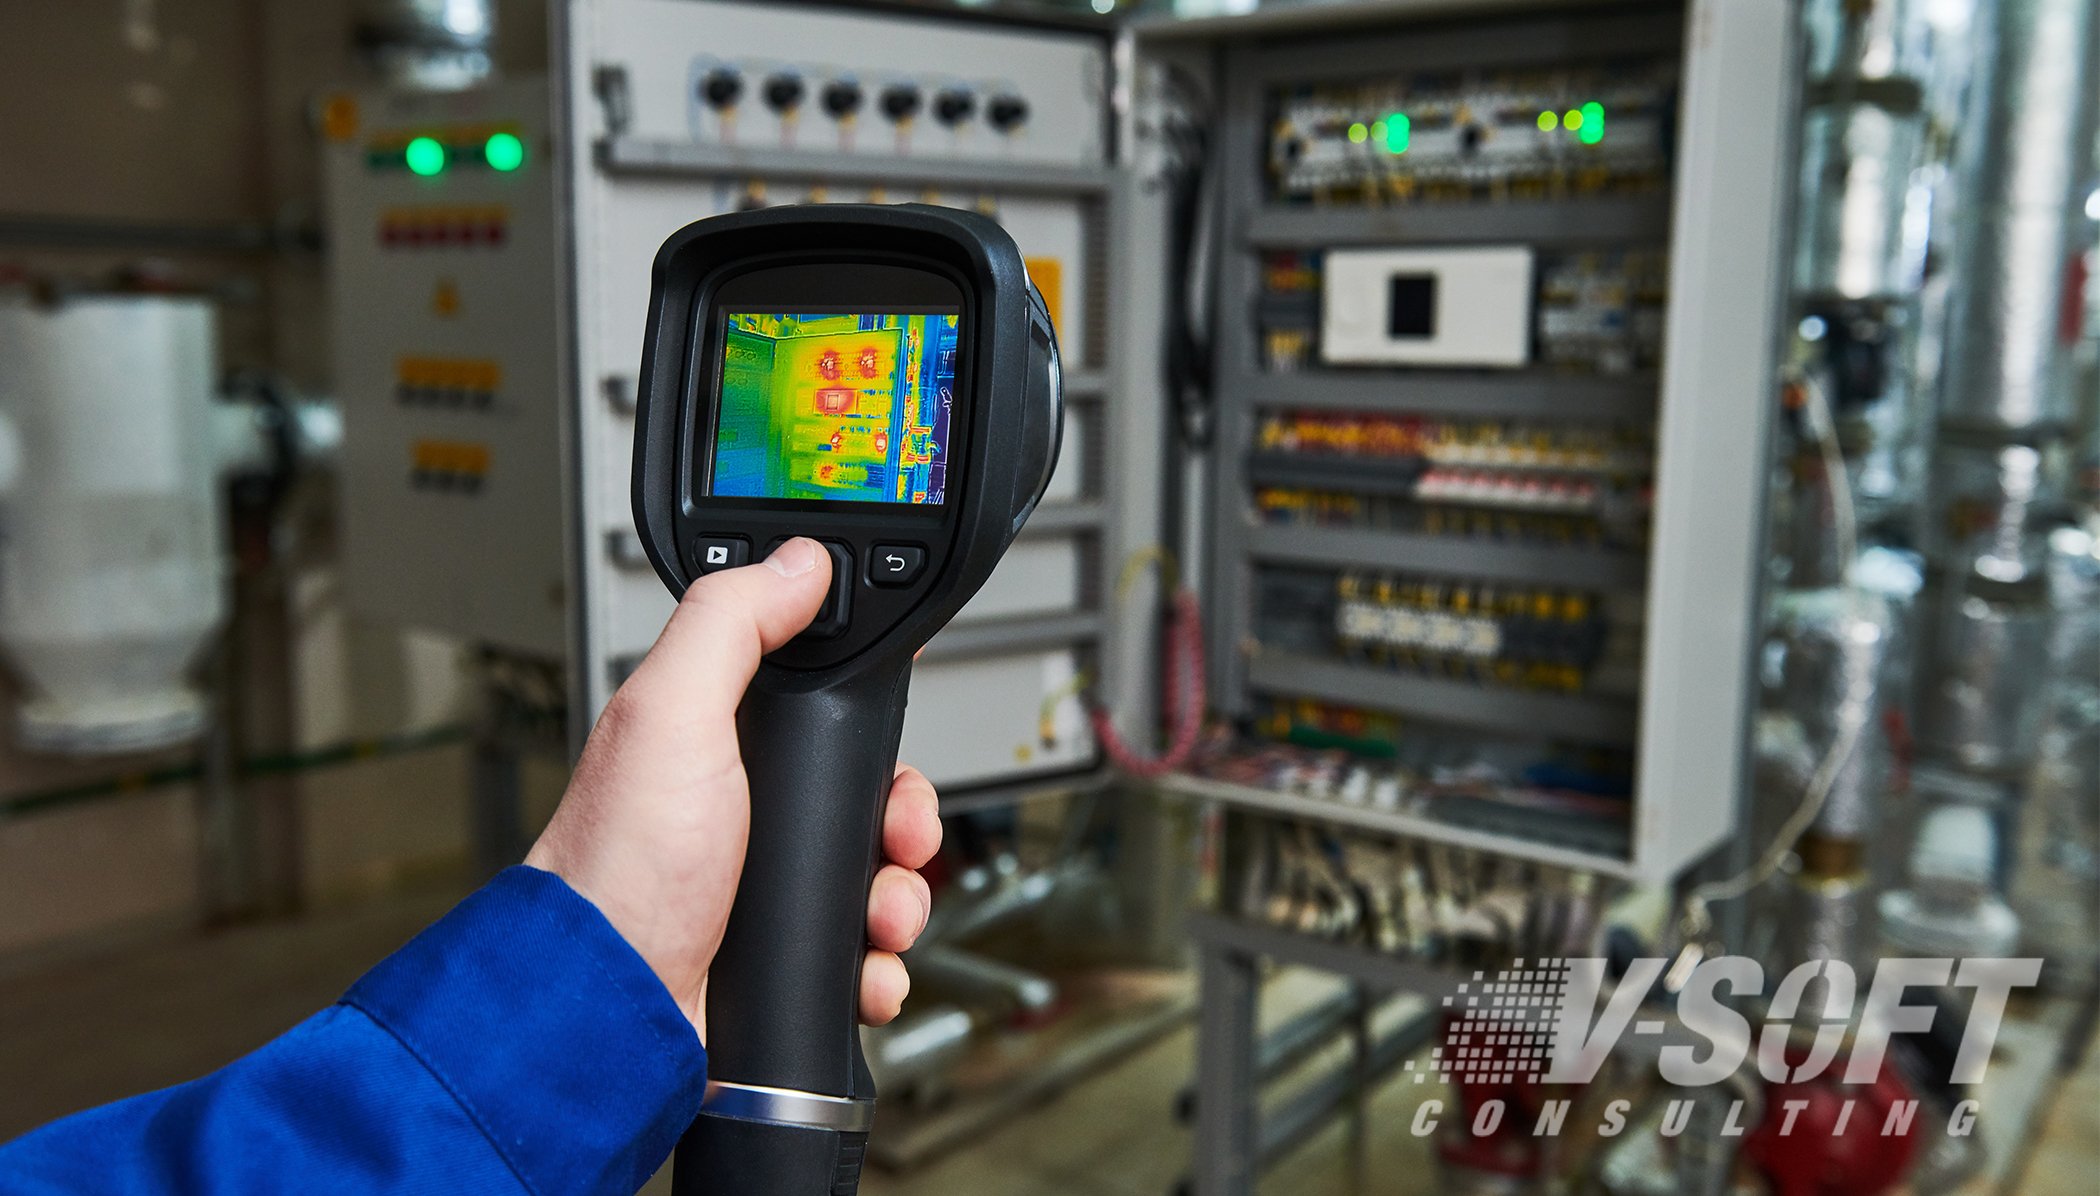 Thermal imaging can detect elevated temperatures in manufacturing equipment to signal damages or failures.